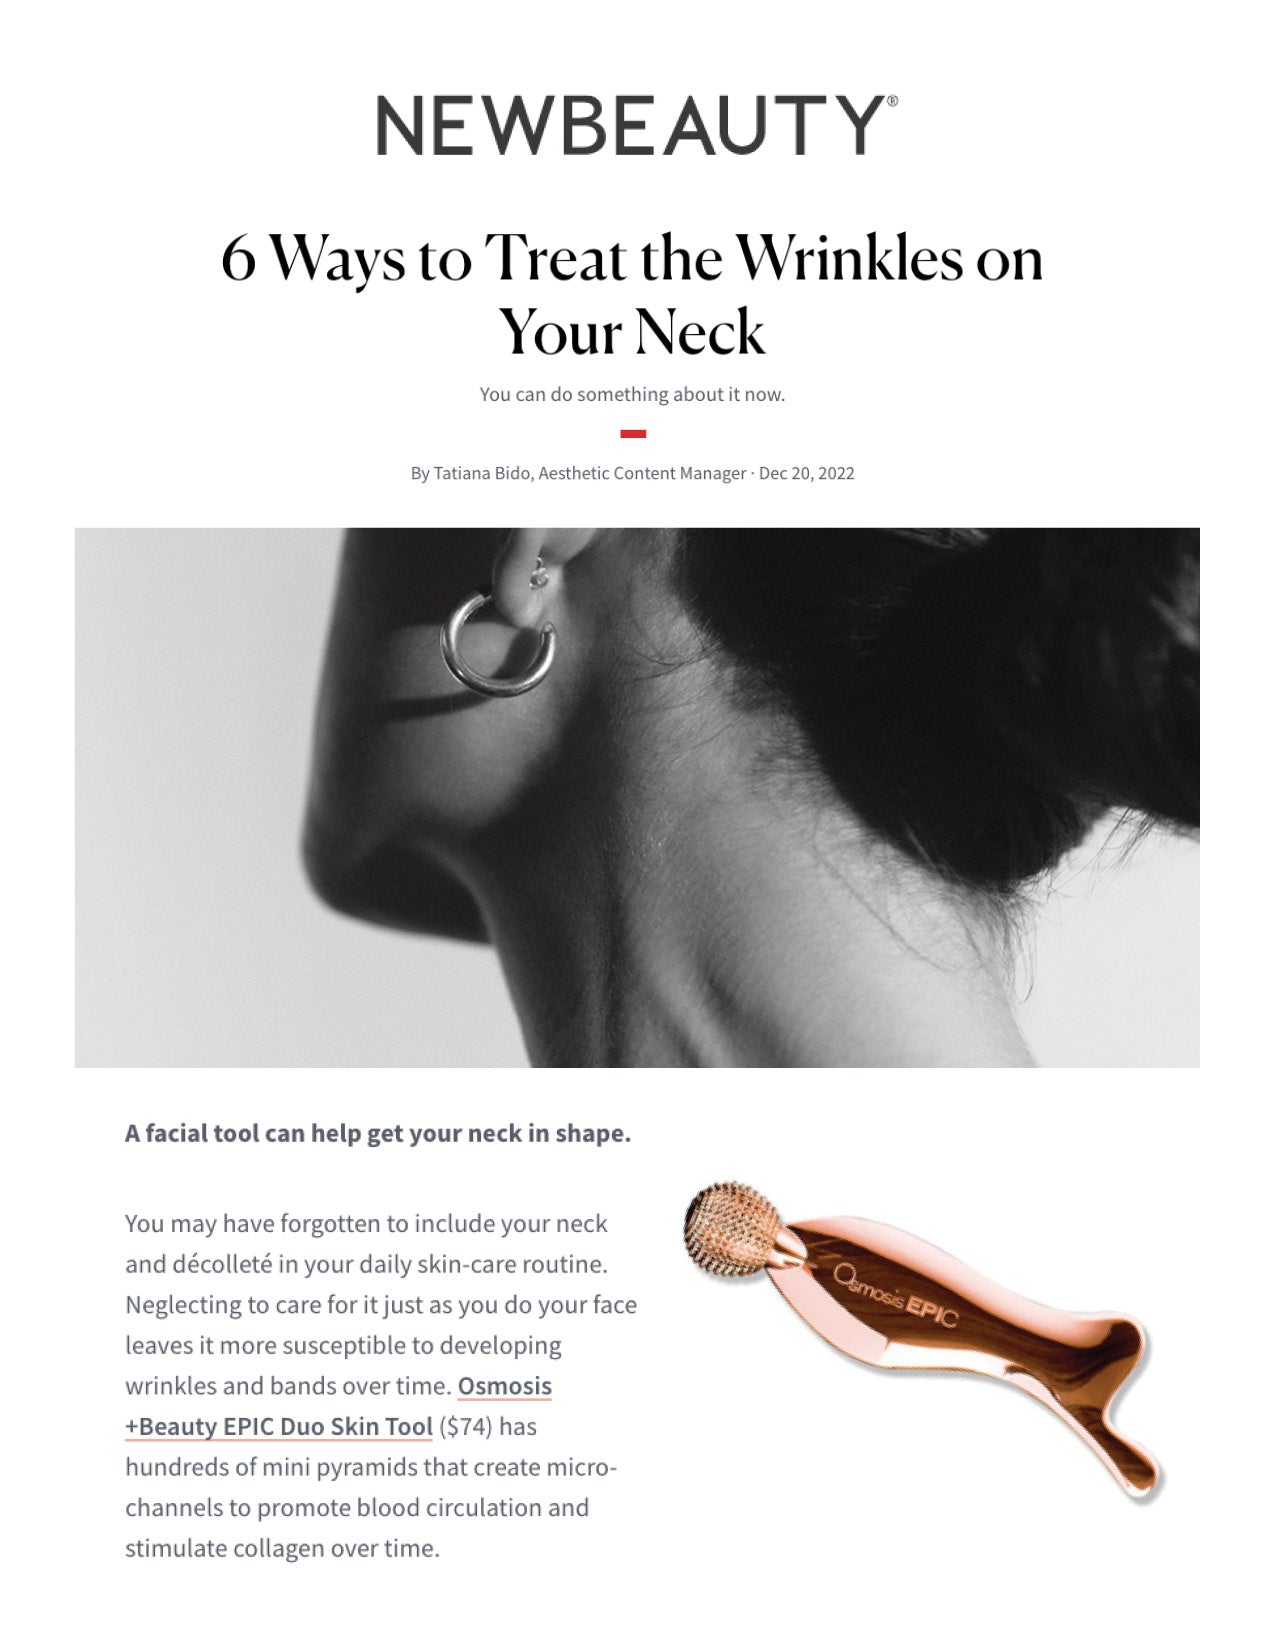 NewBeauty featured the Osmosis EPIC Duo Skin Tool in a story titled 6 Ways to Treat the Wrinkles on Your Neck